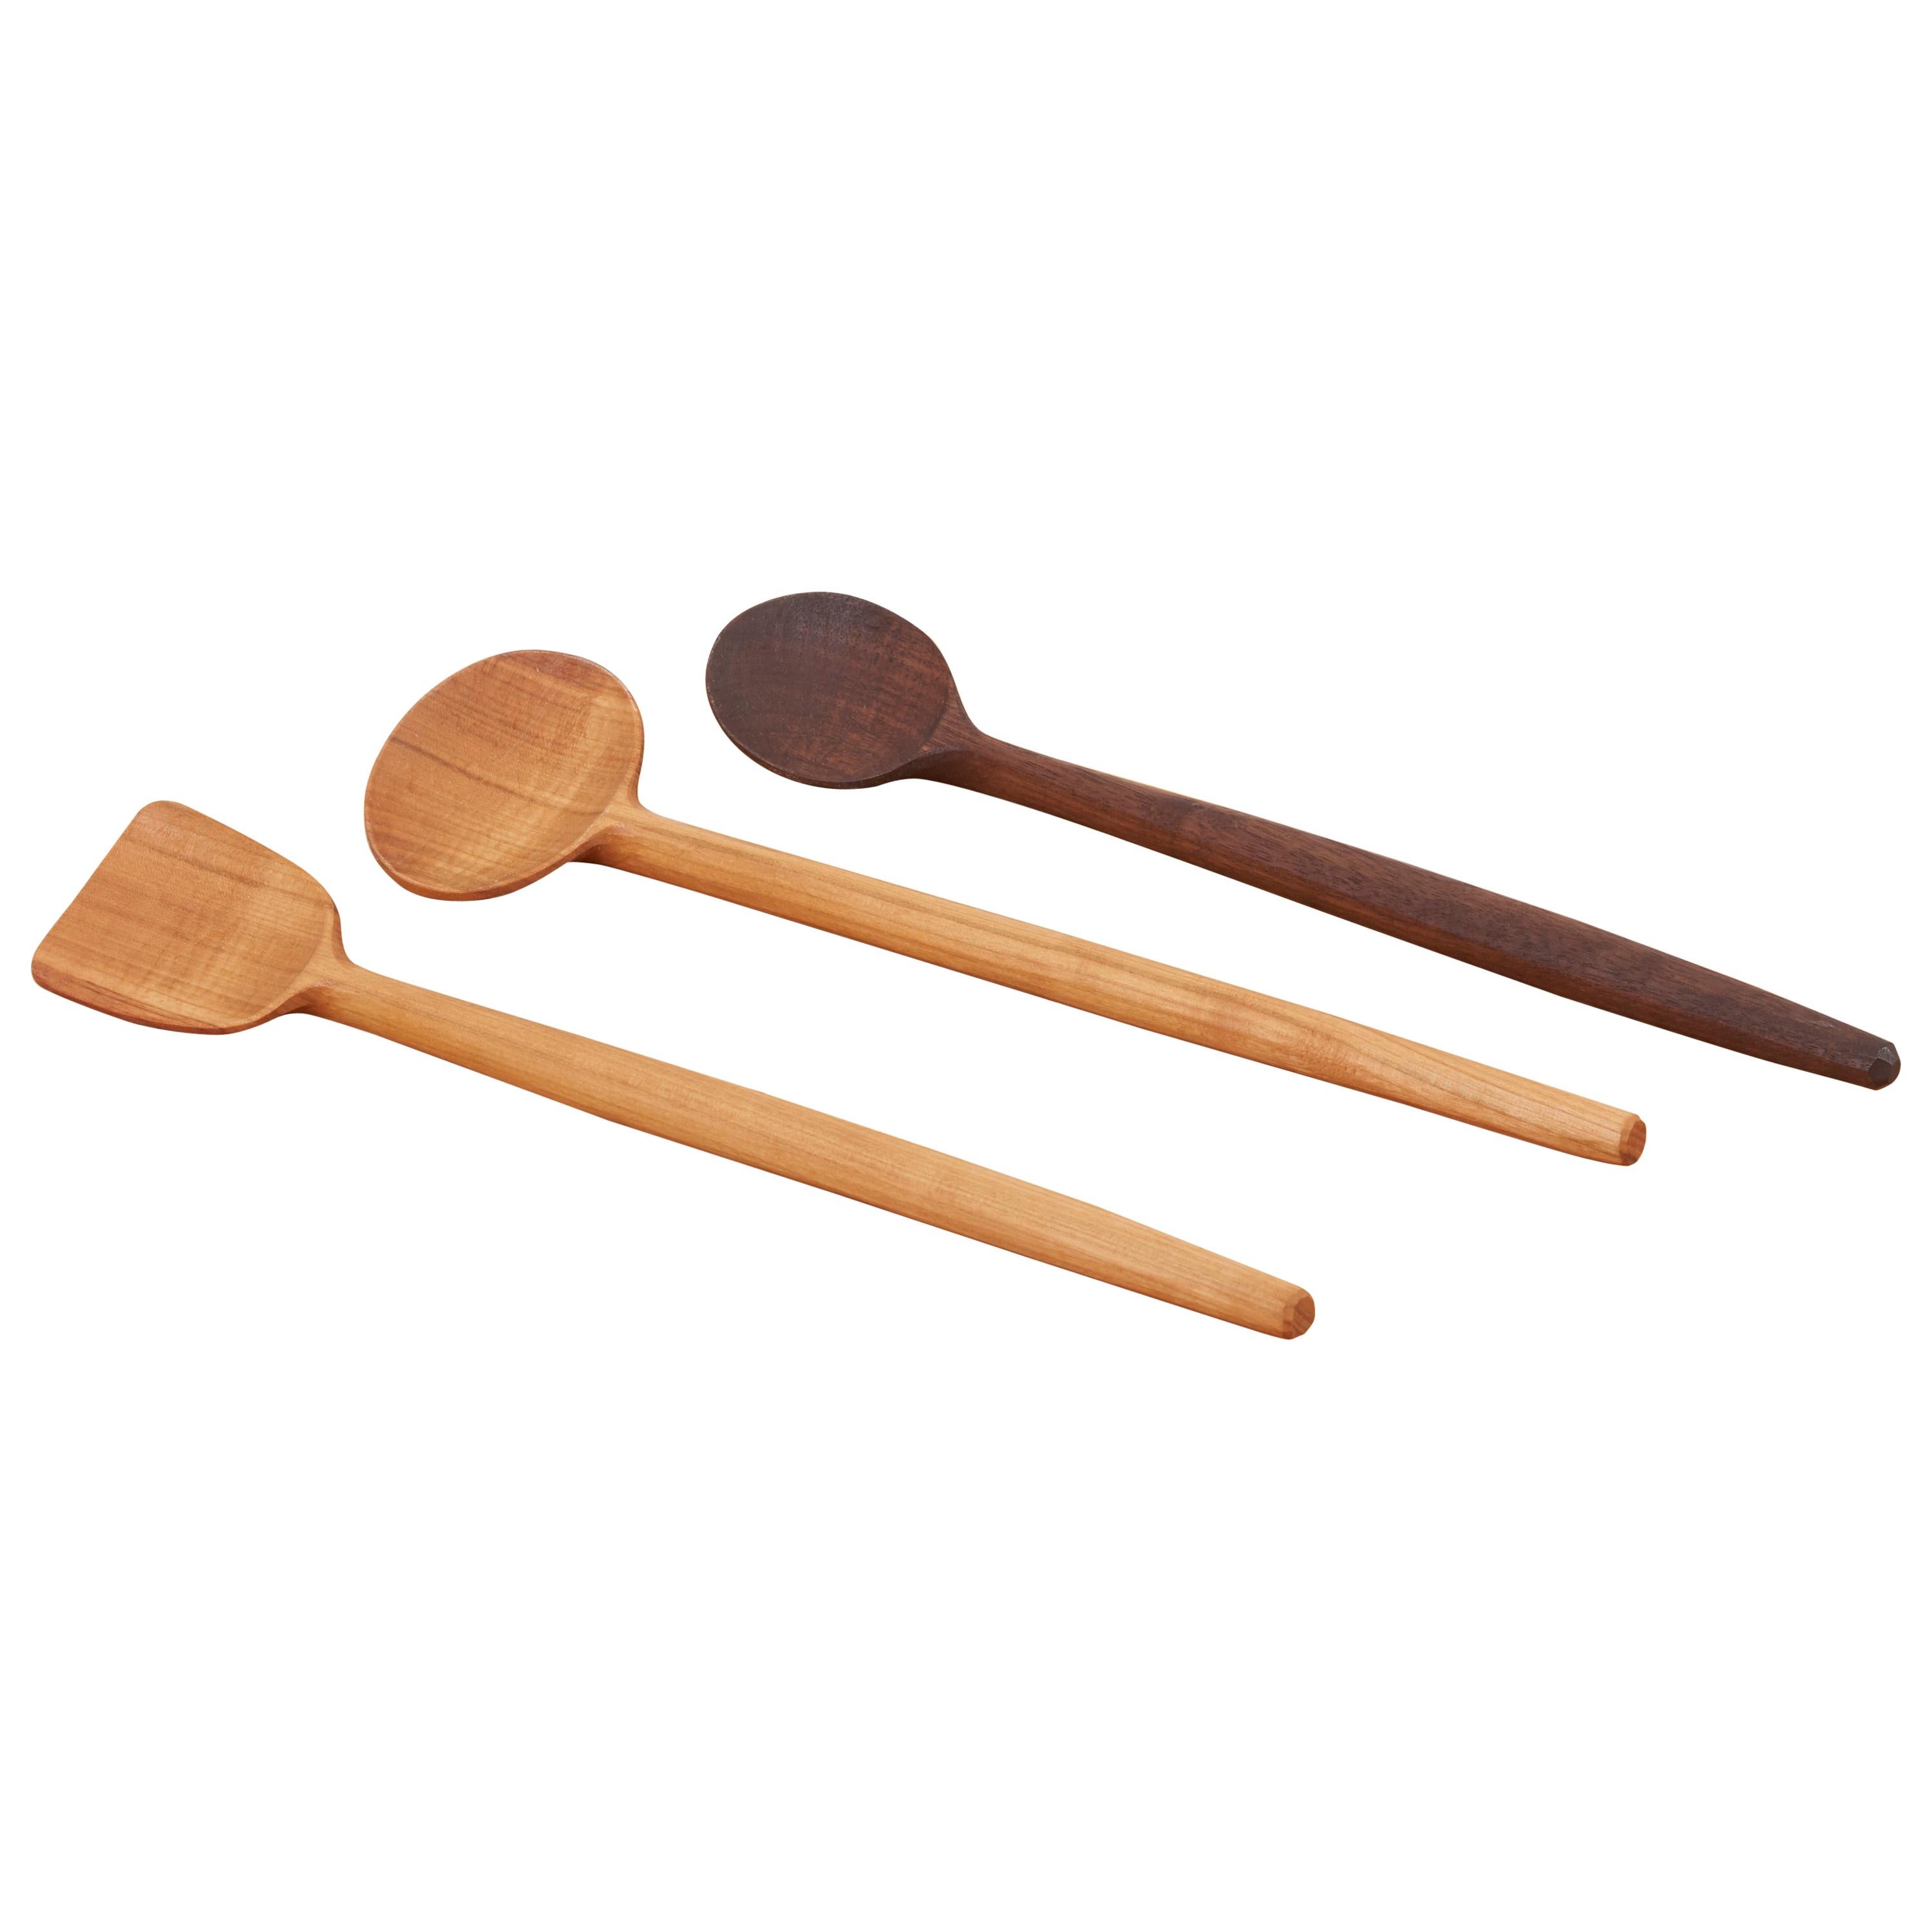 Set of 3 Wooden Spoons by Fabian Fischer, Germany, 2020 For Sale